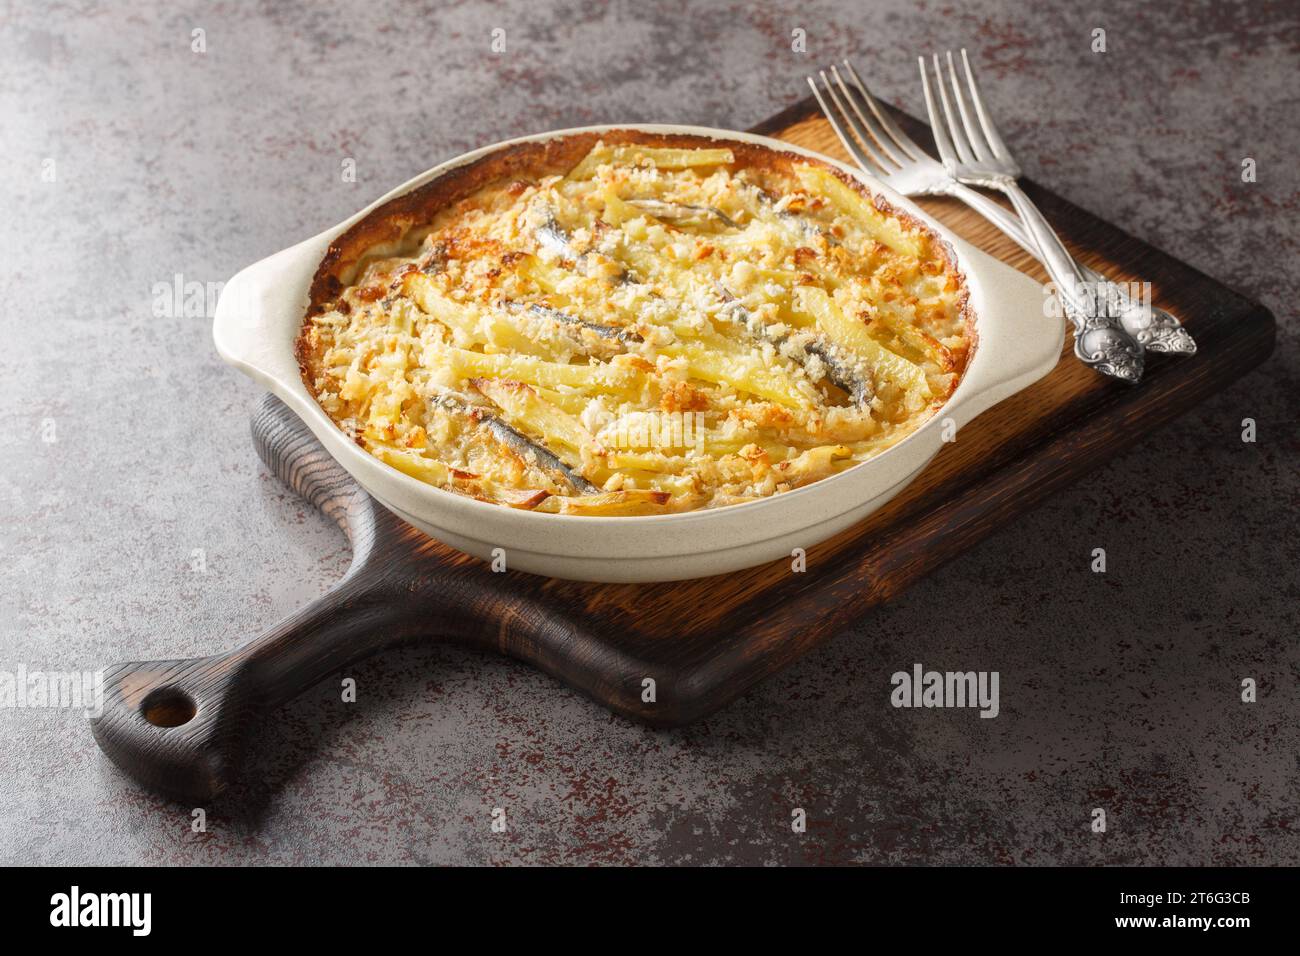 Janssons frestelse or Jansson's temptation is a creamy potato casserole traditionally served at Christmas in Sweden closeup on the baking dish on the Stock Photo